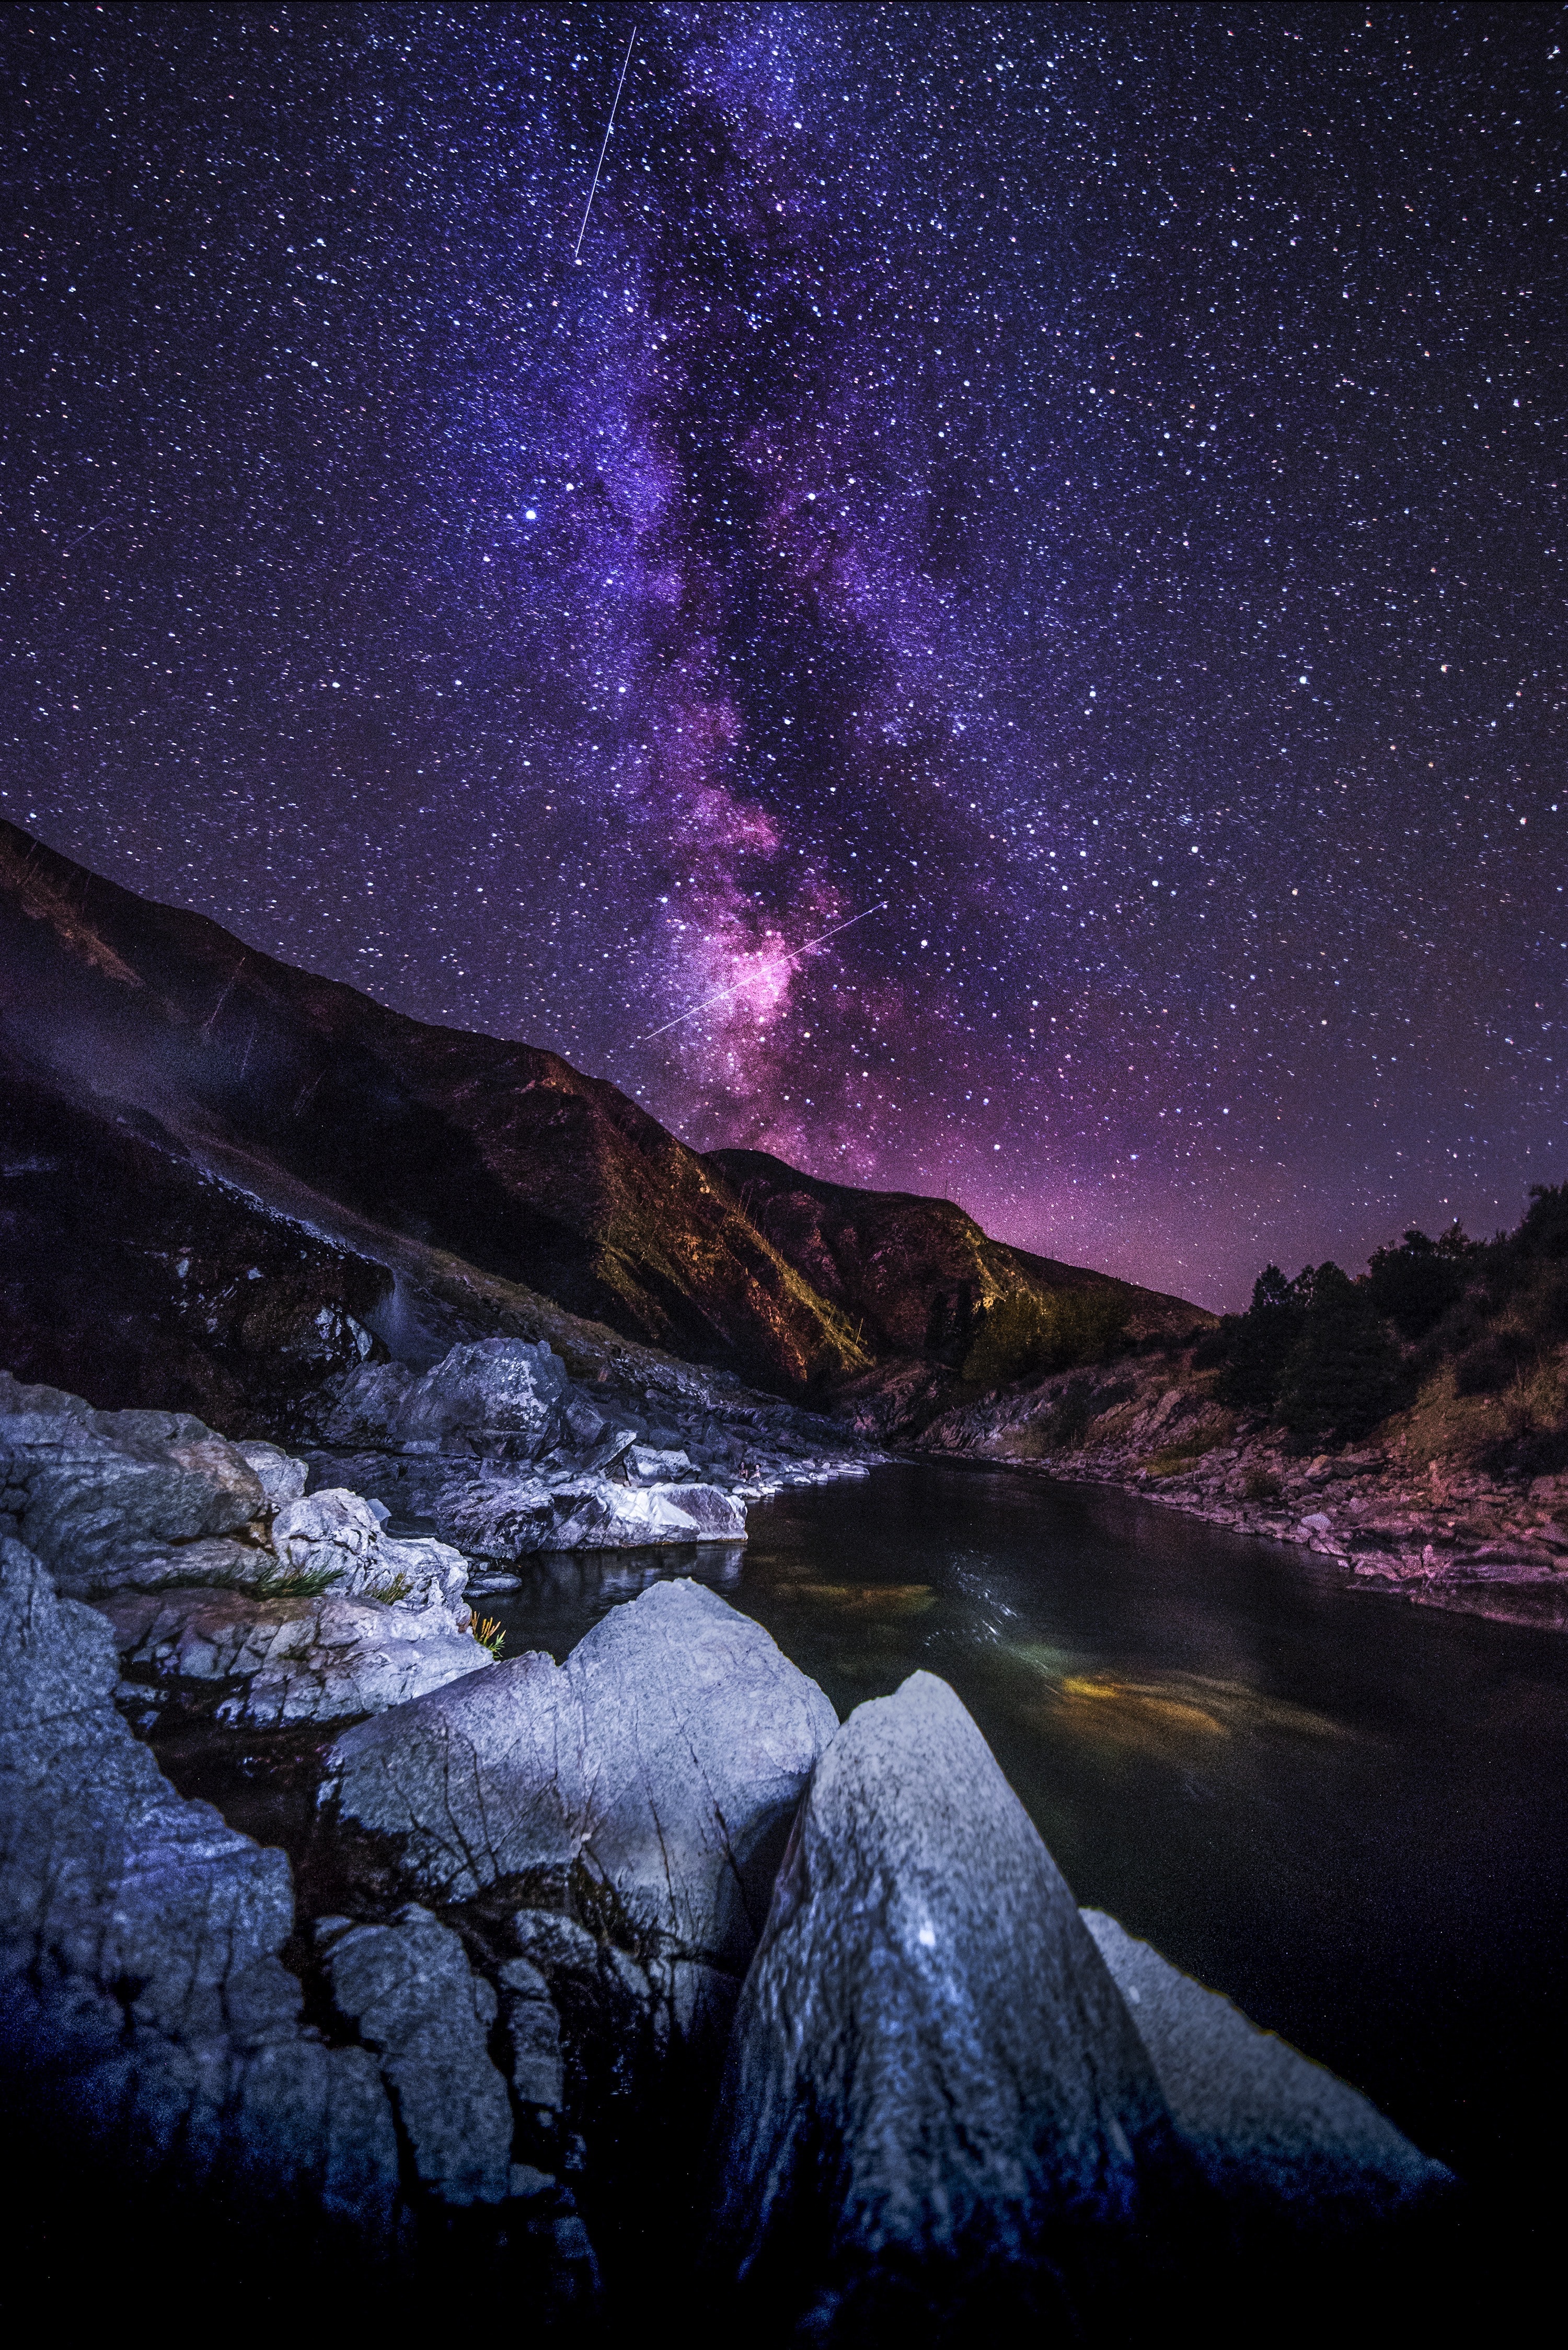 rivers, starry sky, nature, landscape, mountains, night High Definition image